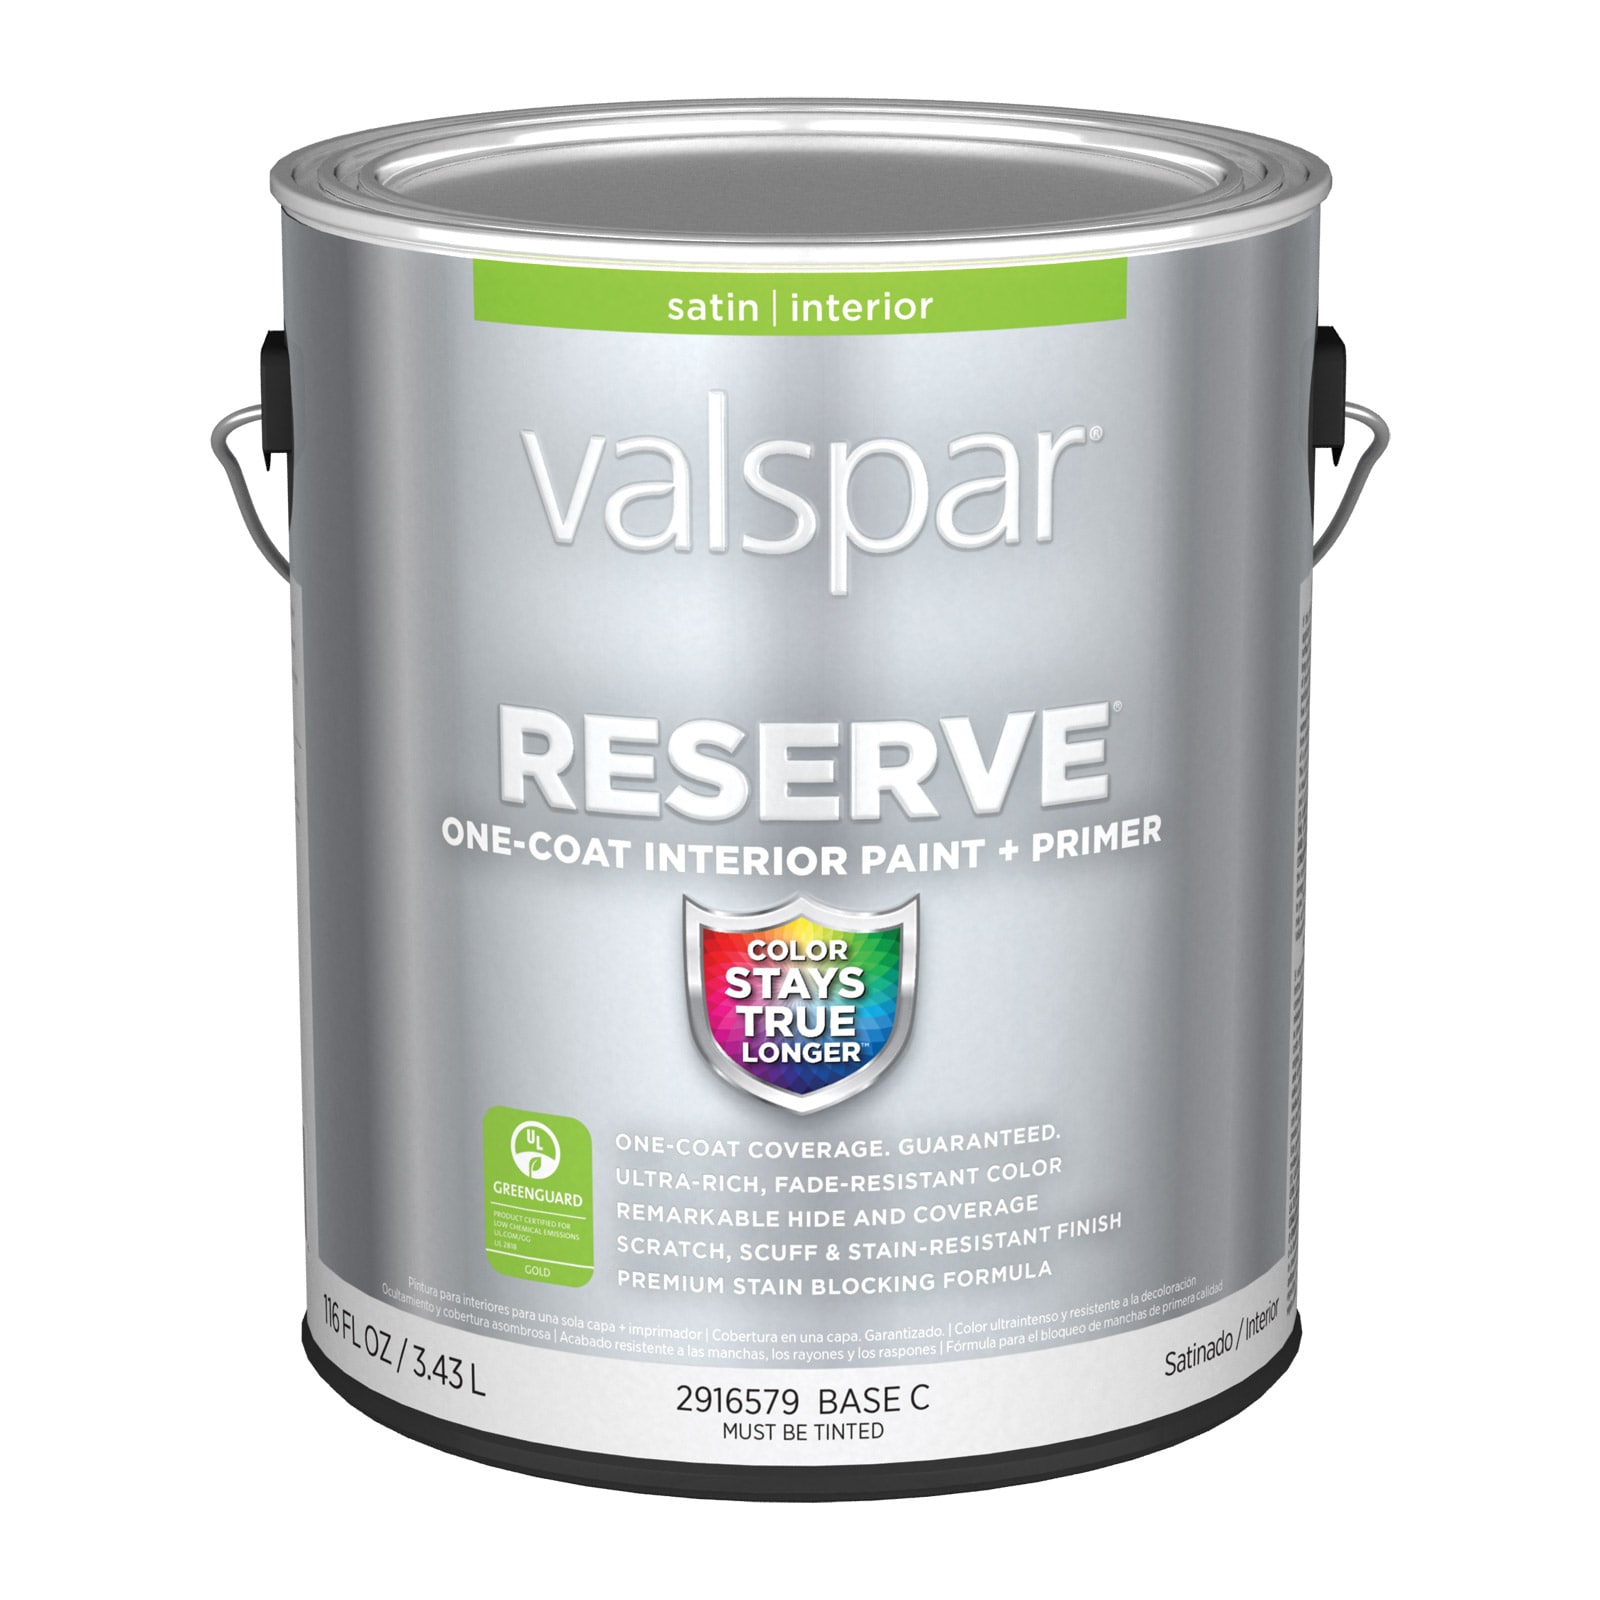 Valspar Reserve Satin Tintable Interior Paint 1-gallon In The Interior Paint Department At Lowescom